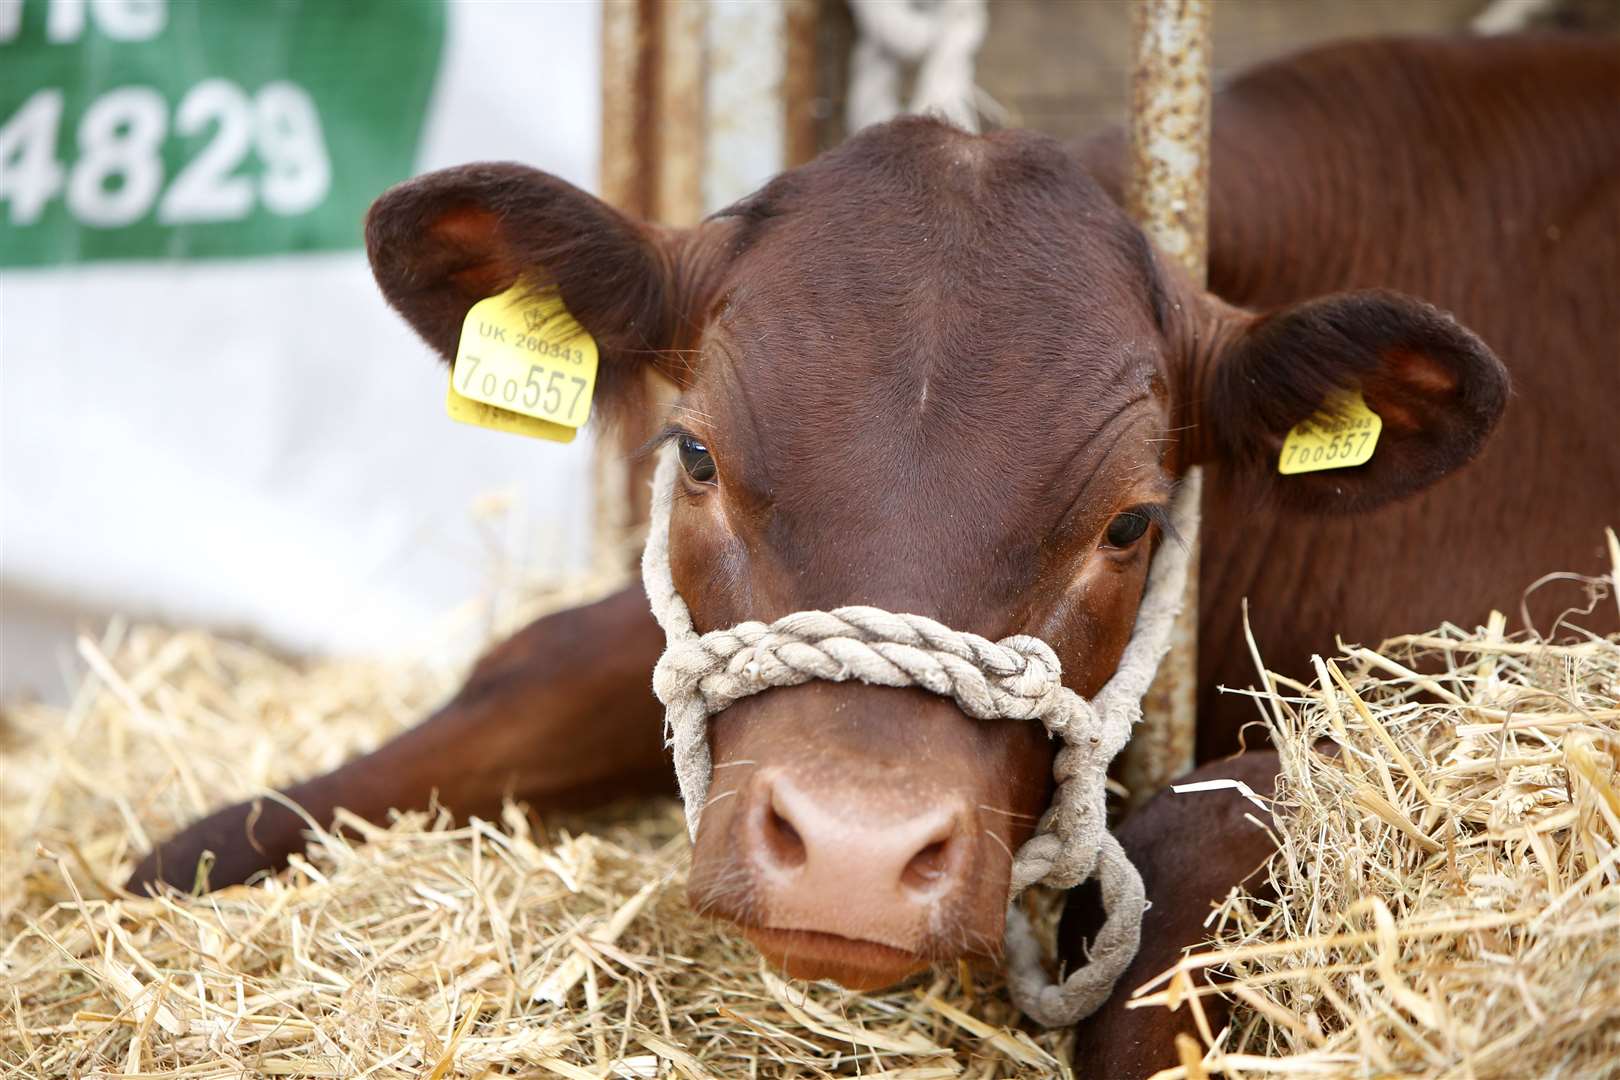 The Kent County Show at Kent Showground, Detling, Maidstone, is a showcase of the county's agriculture .Picture: Andy Jones